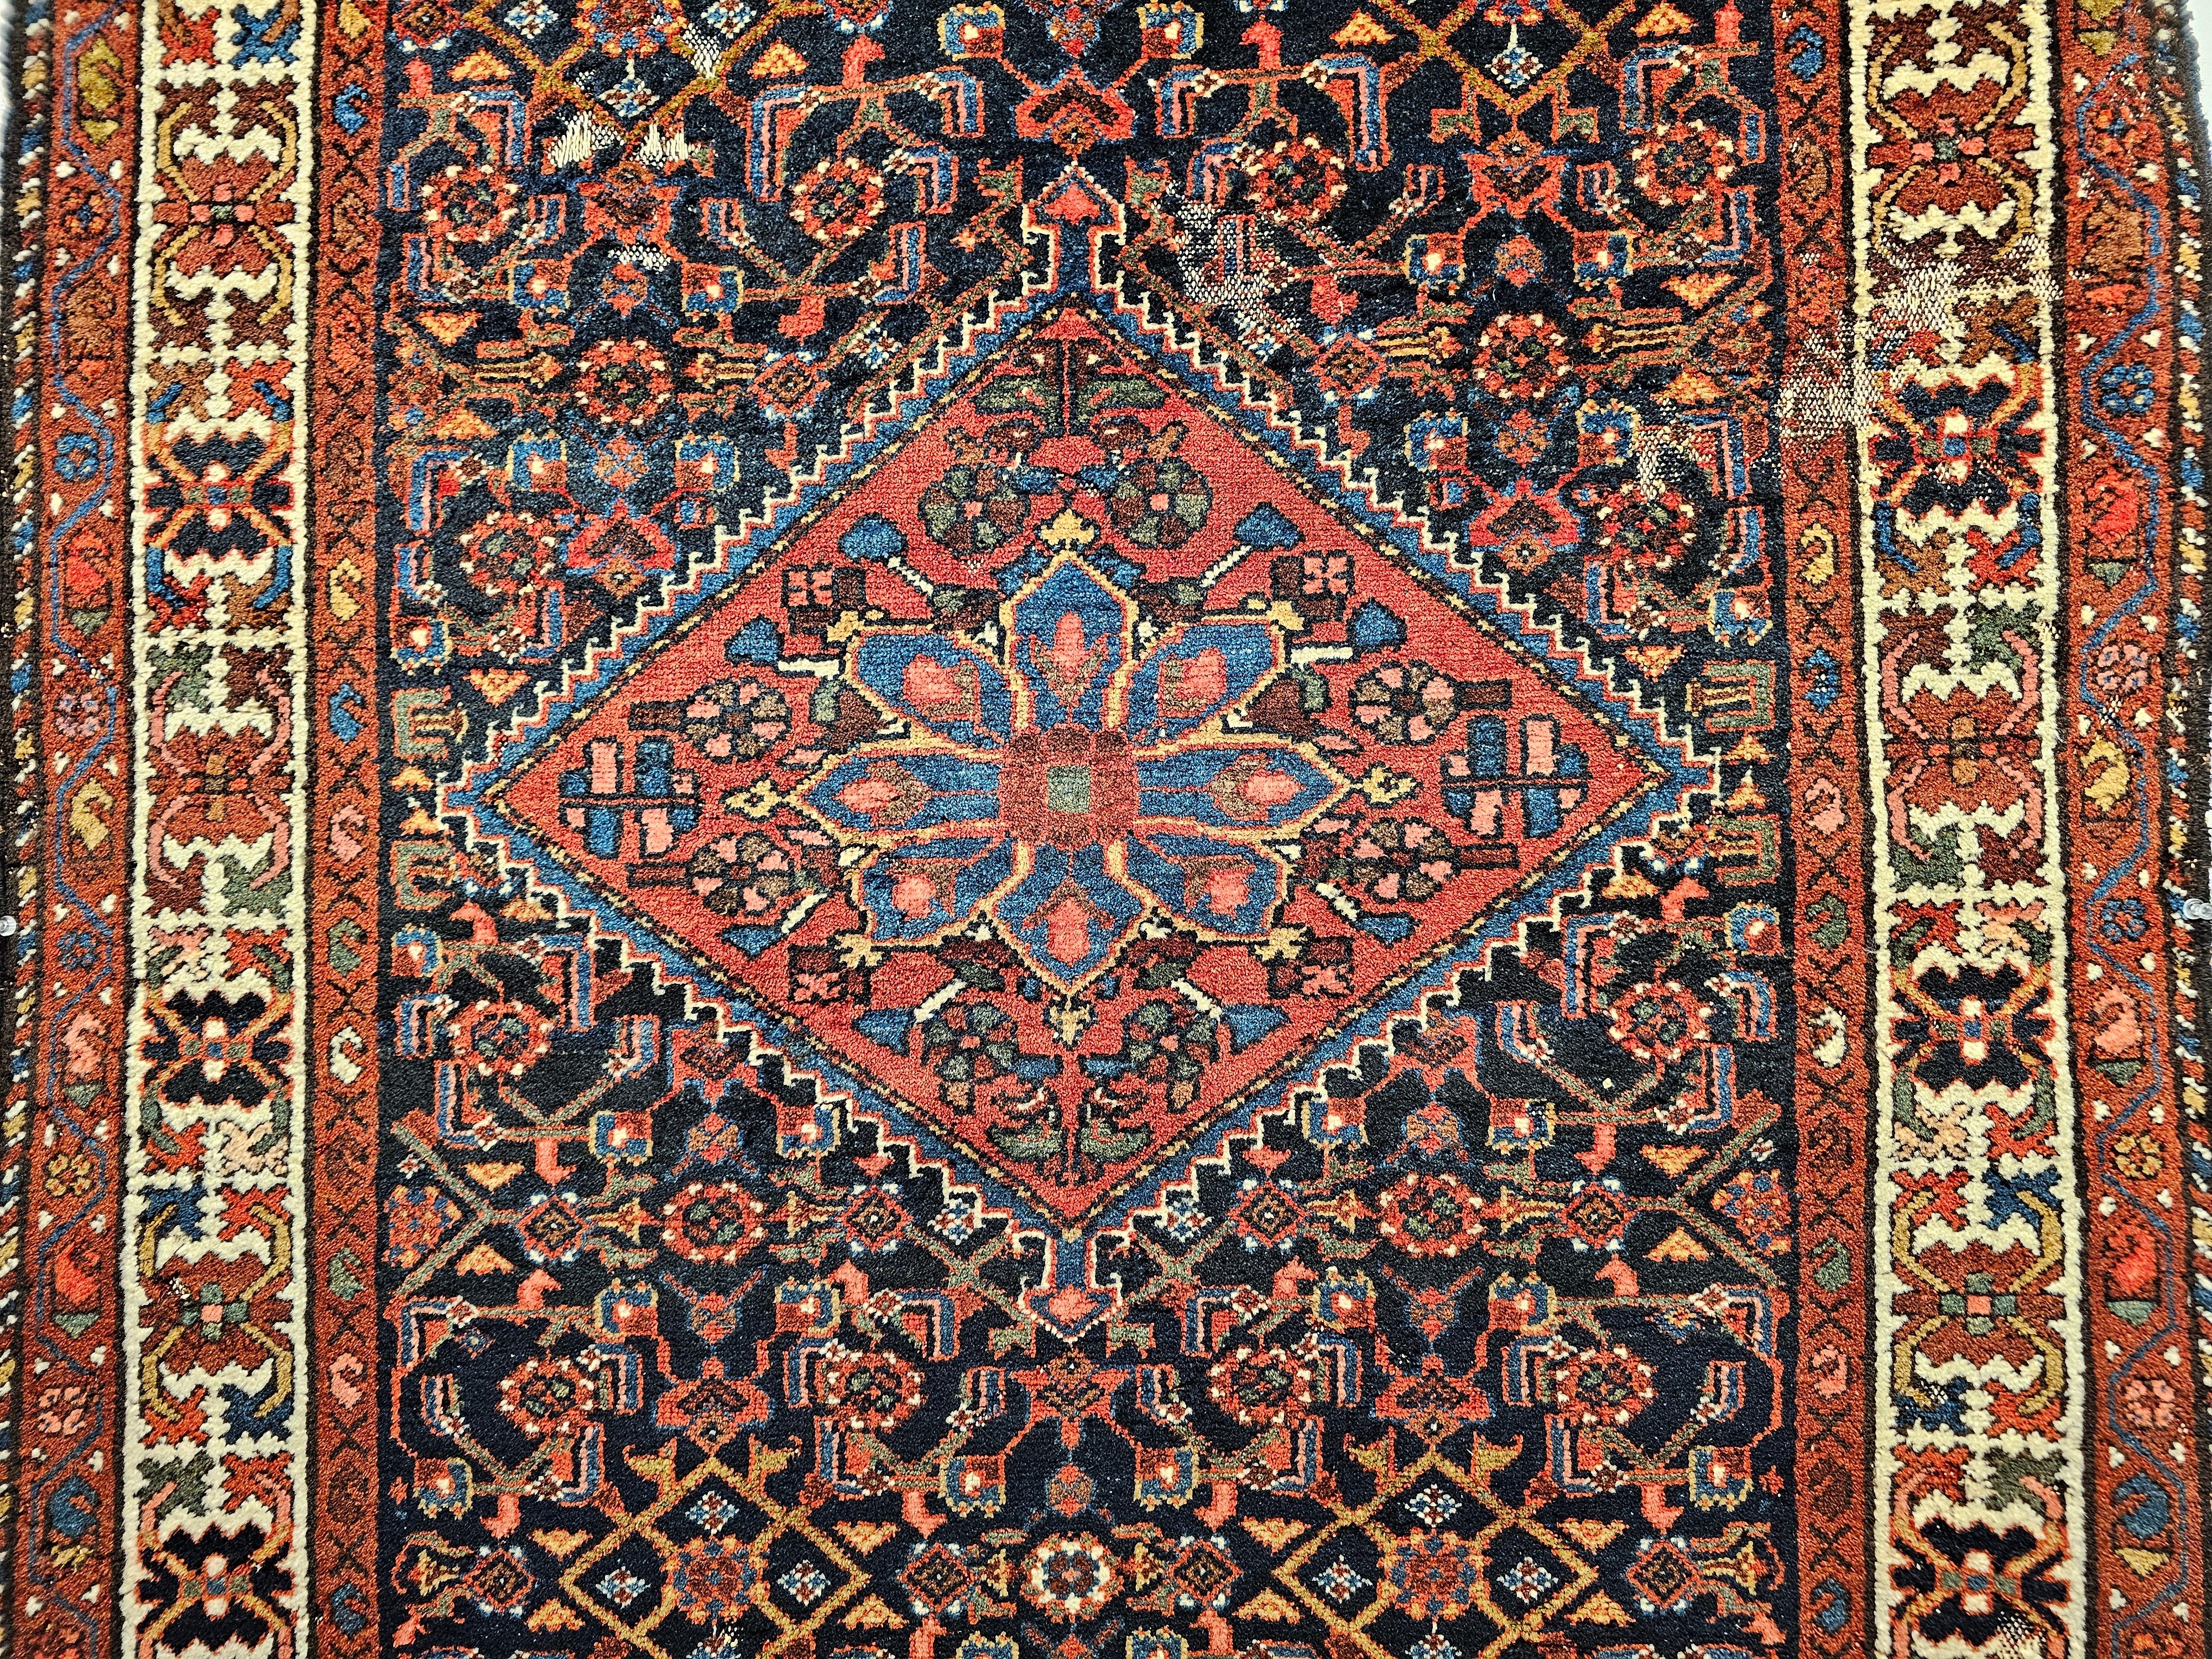 Vintage Persian Malayer Area Rug in Allover Pattern in Navy, Red, Blue, Brown In Good Condition For Sale In Barrington, IL